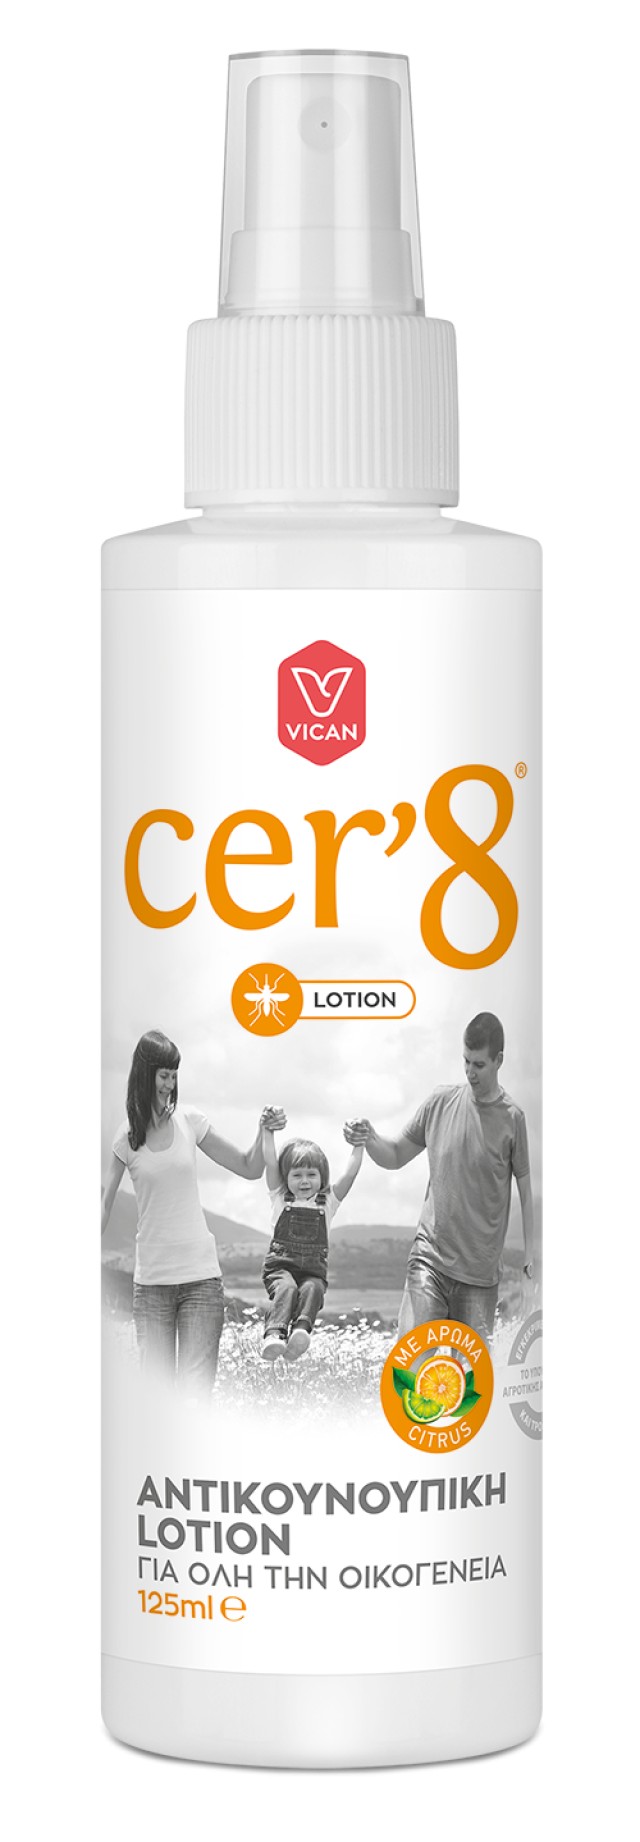 VICAN Cer 8 Αντικουνουπική Lotion 125ml